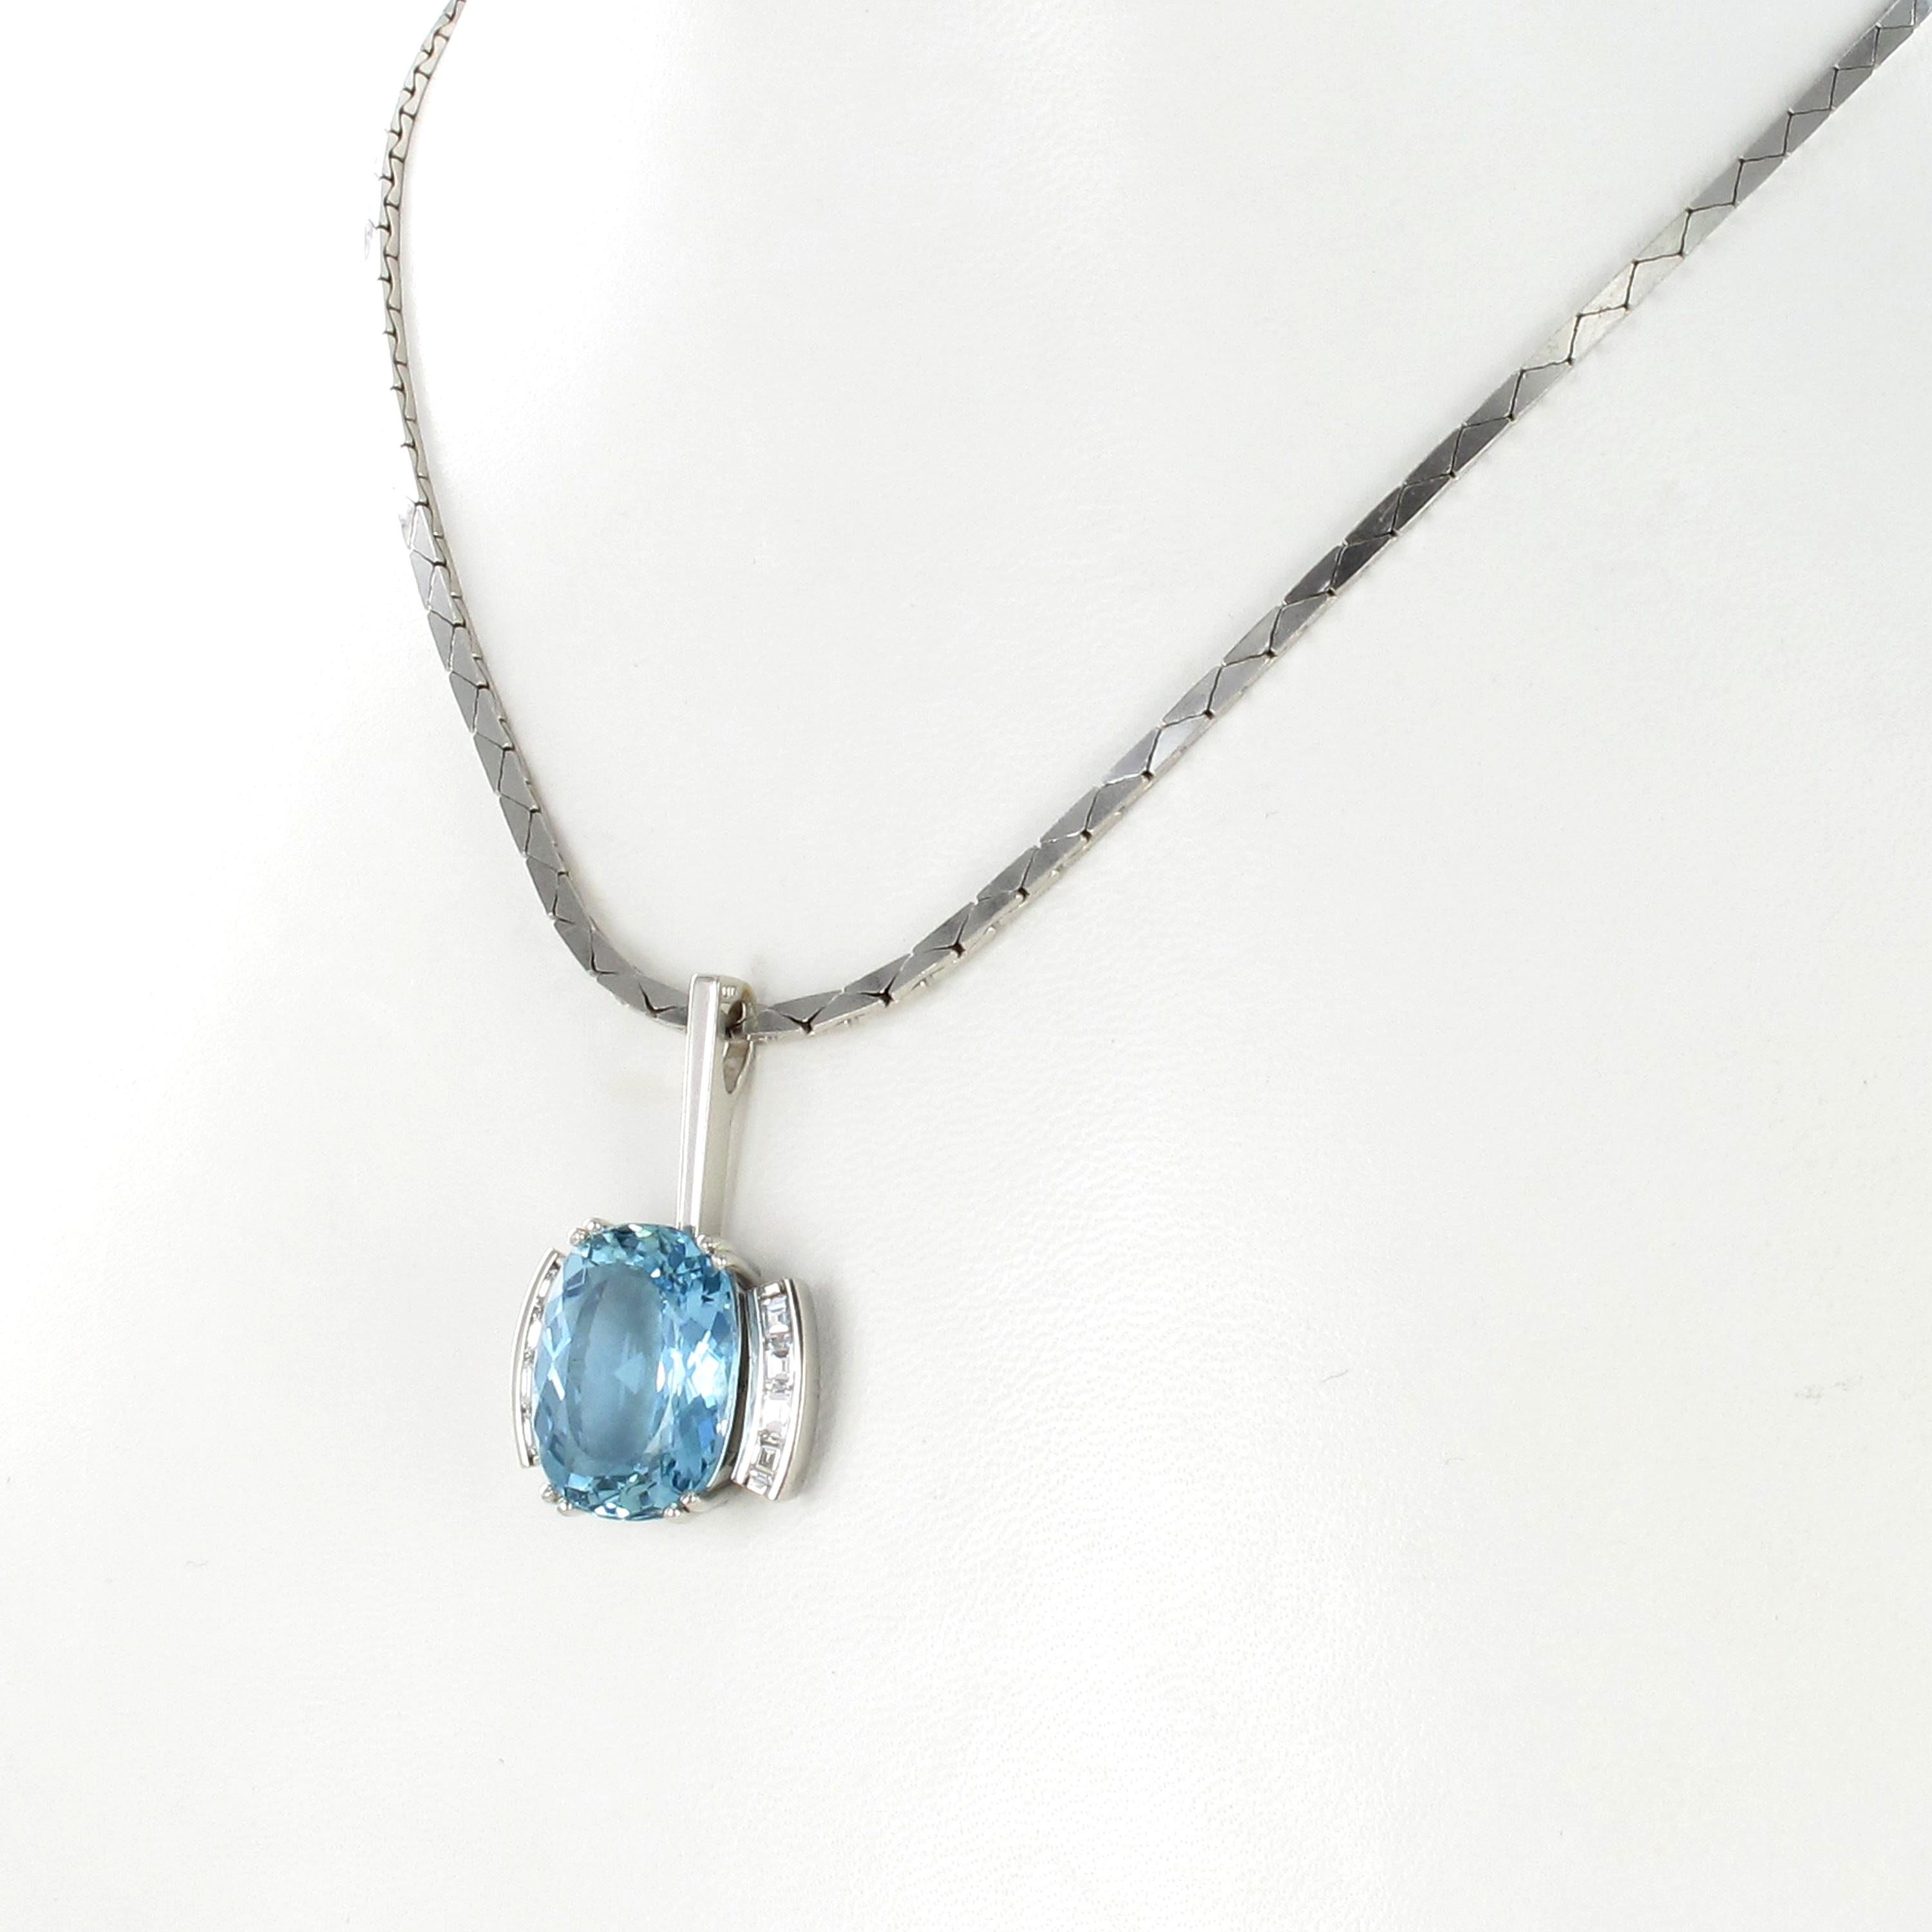 This beautiful necklace features a cushion shaped aquamarine of approximately 10.70 carats, arfully set in a mounting of platinum 950.
Accented by 8 trapezoidal cut diamonds of G/H colour and vs clarity, total weight approximately 0.80